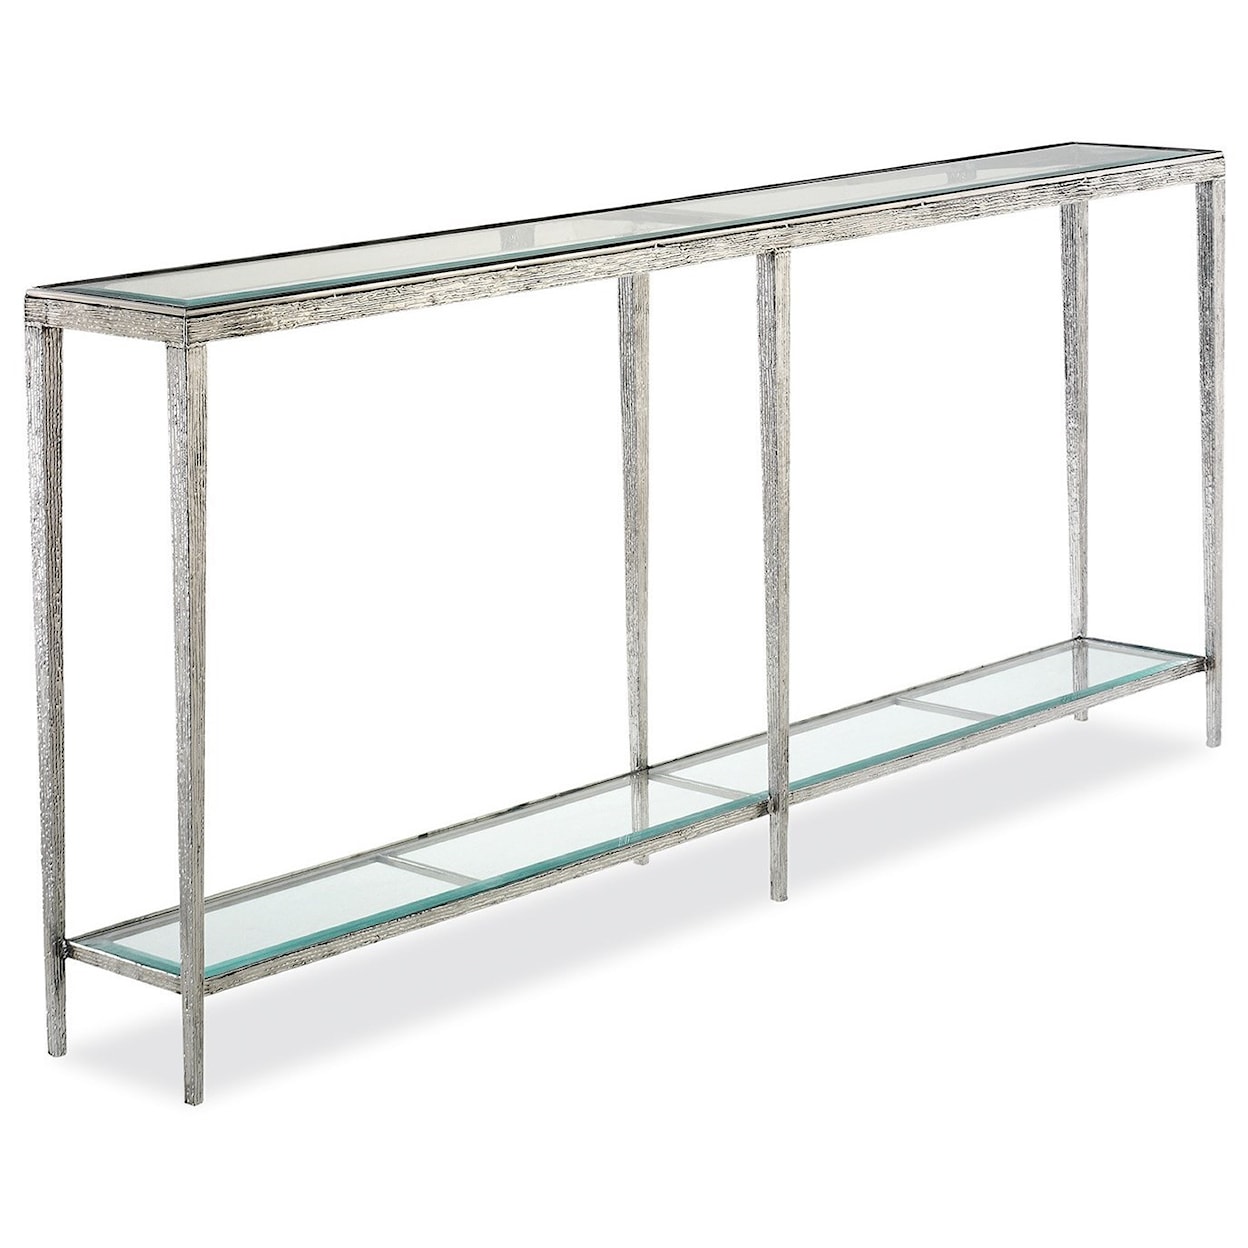 Hancock & Moore H & M Occasional Jinx Large Nickel Console Table